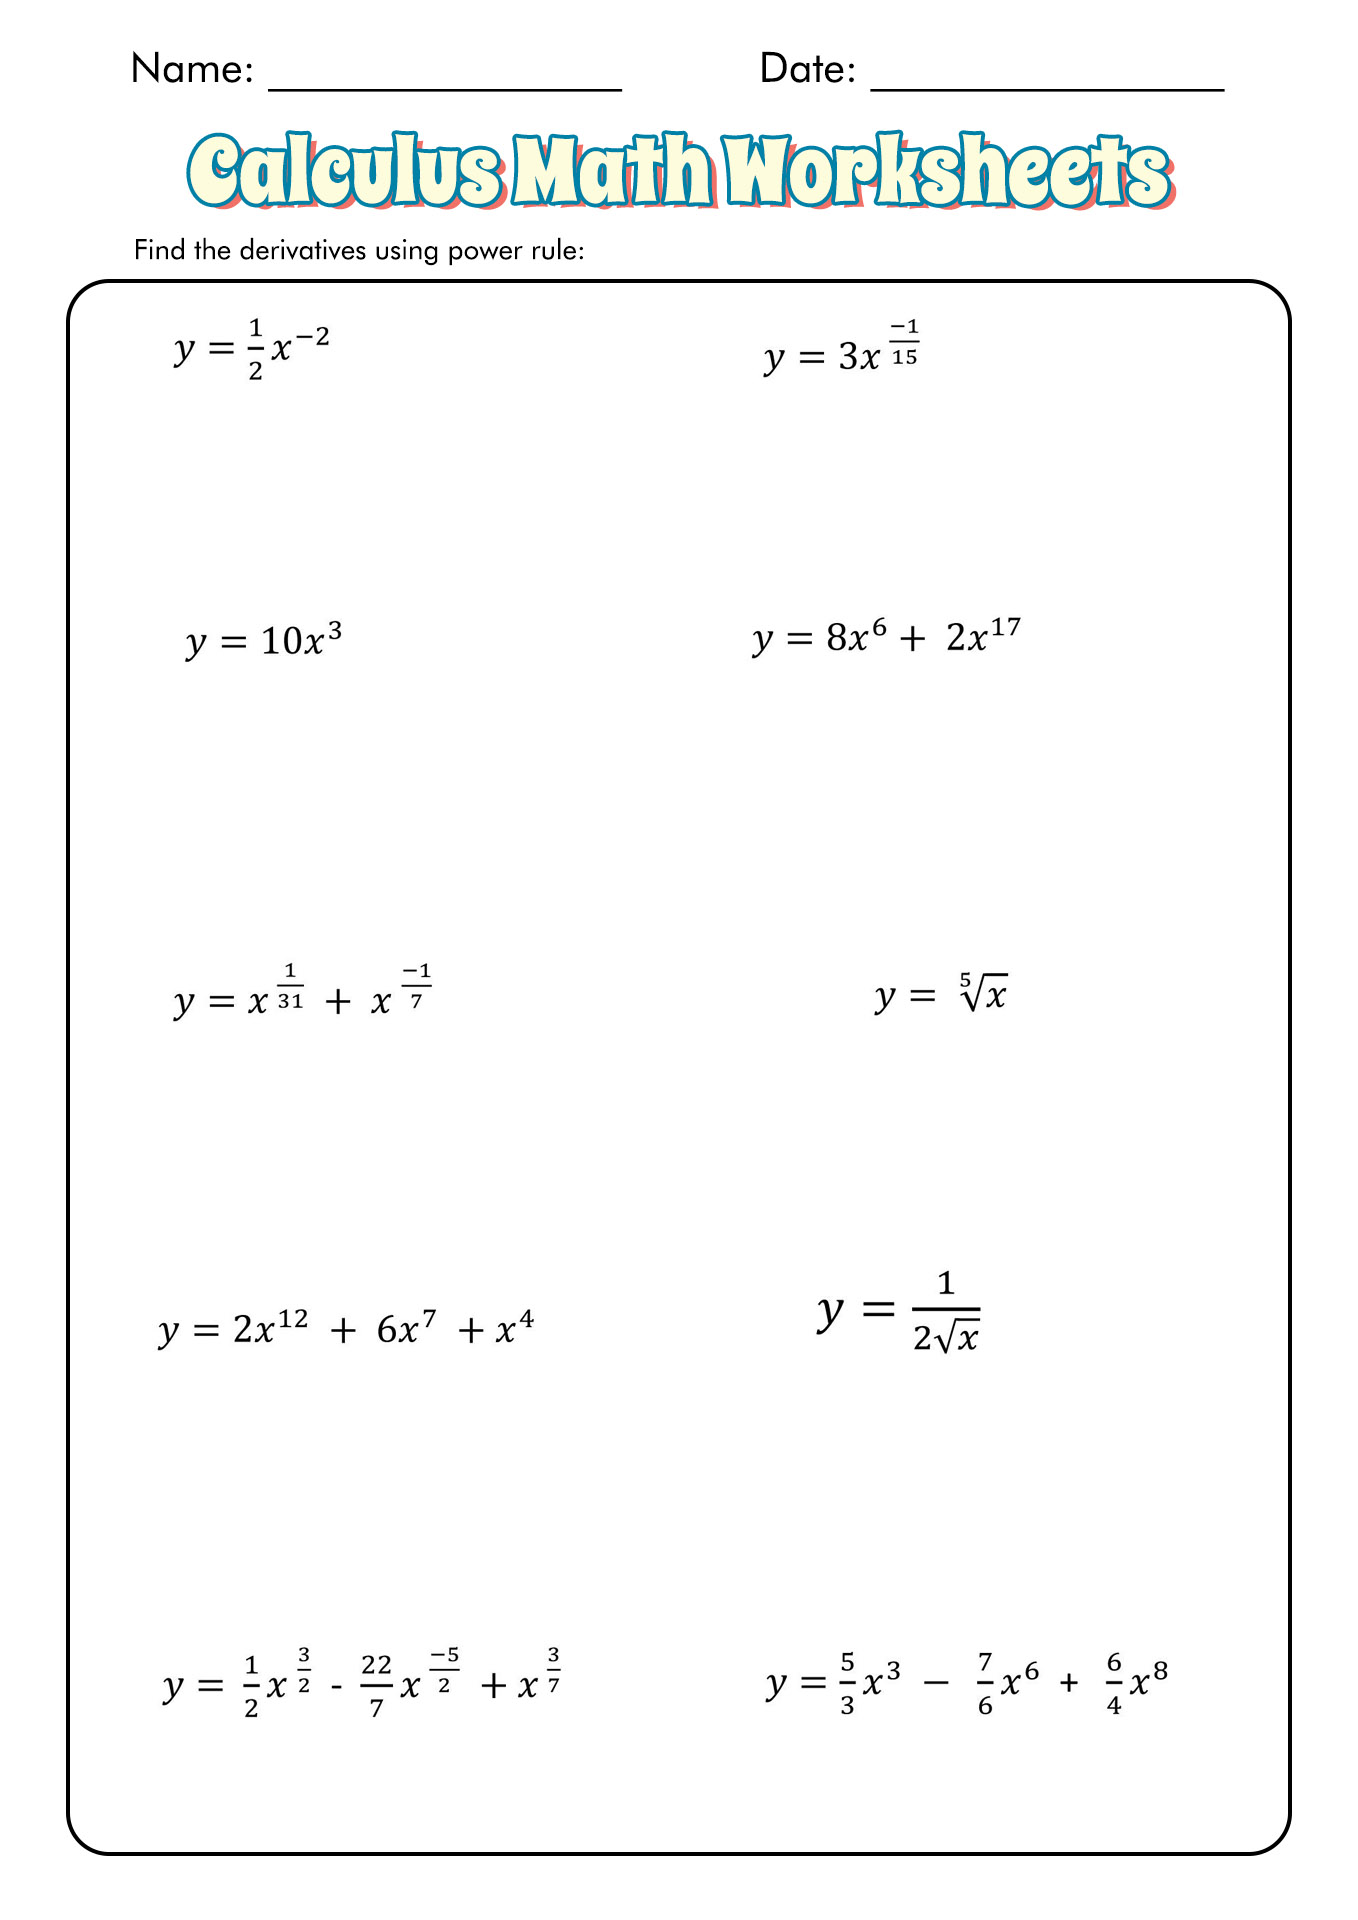 Calculus Math Worksheets Image